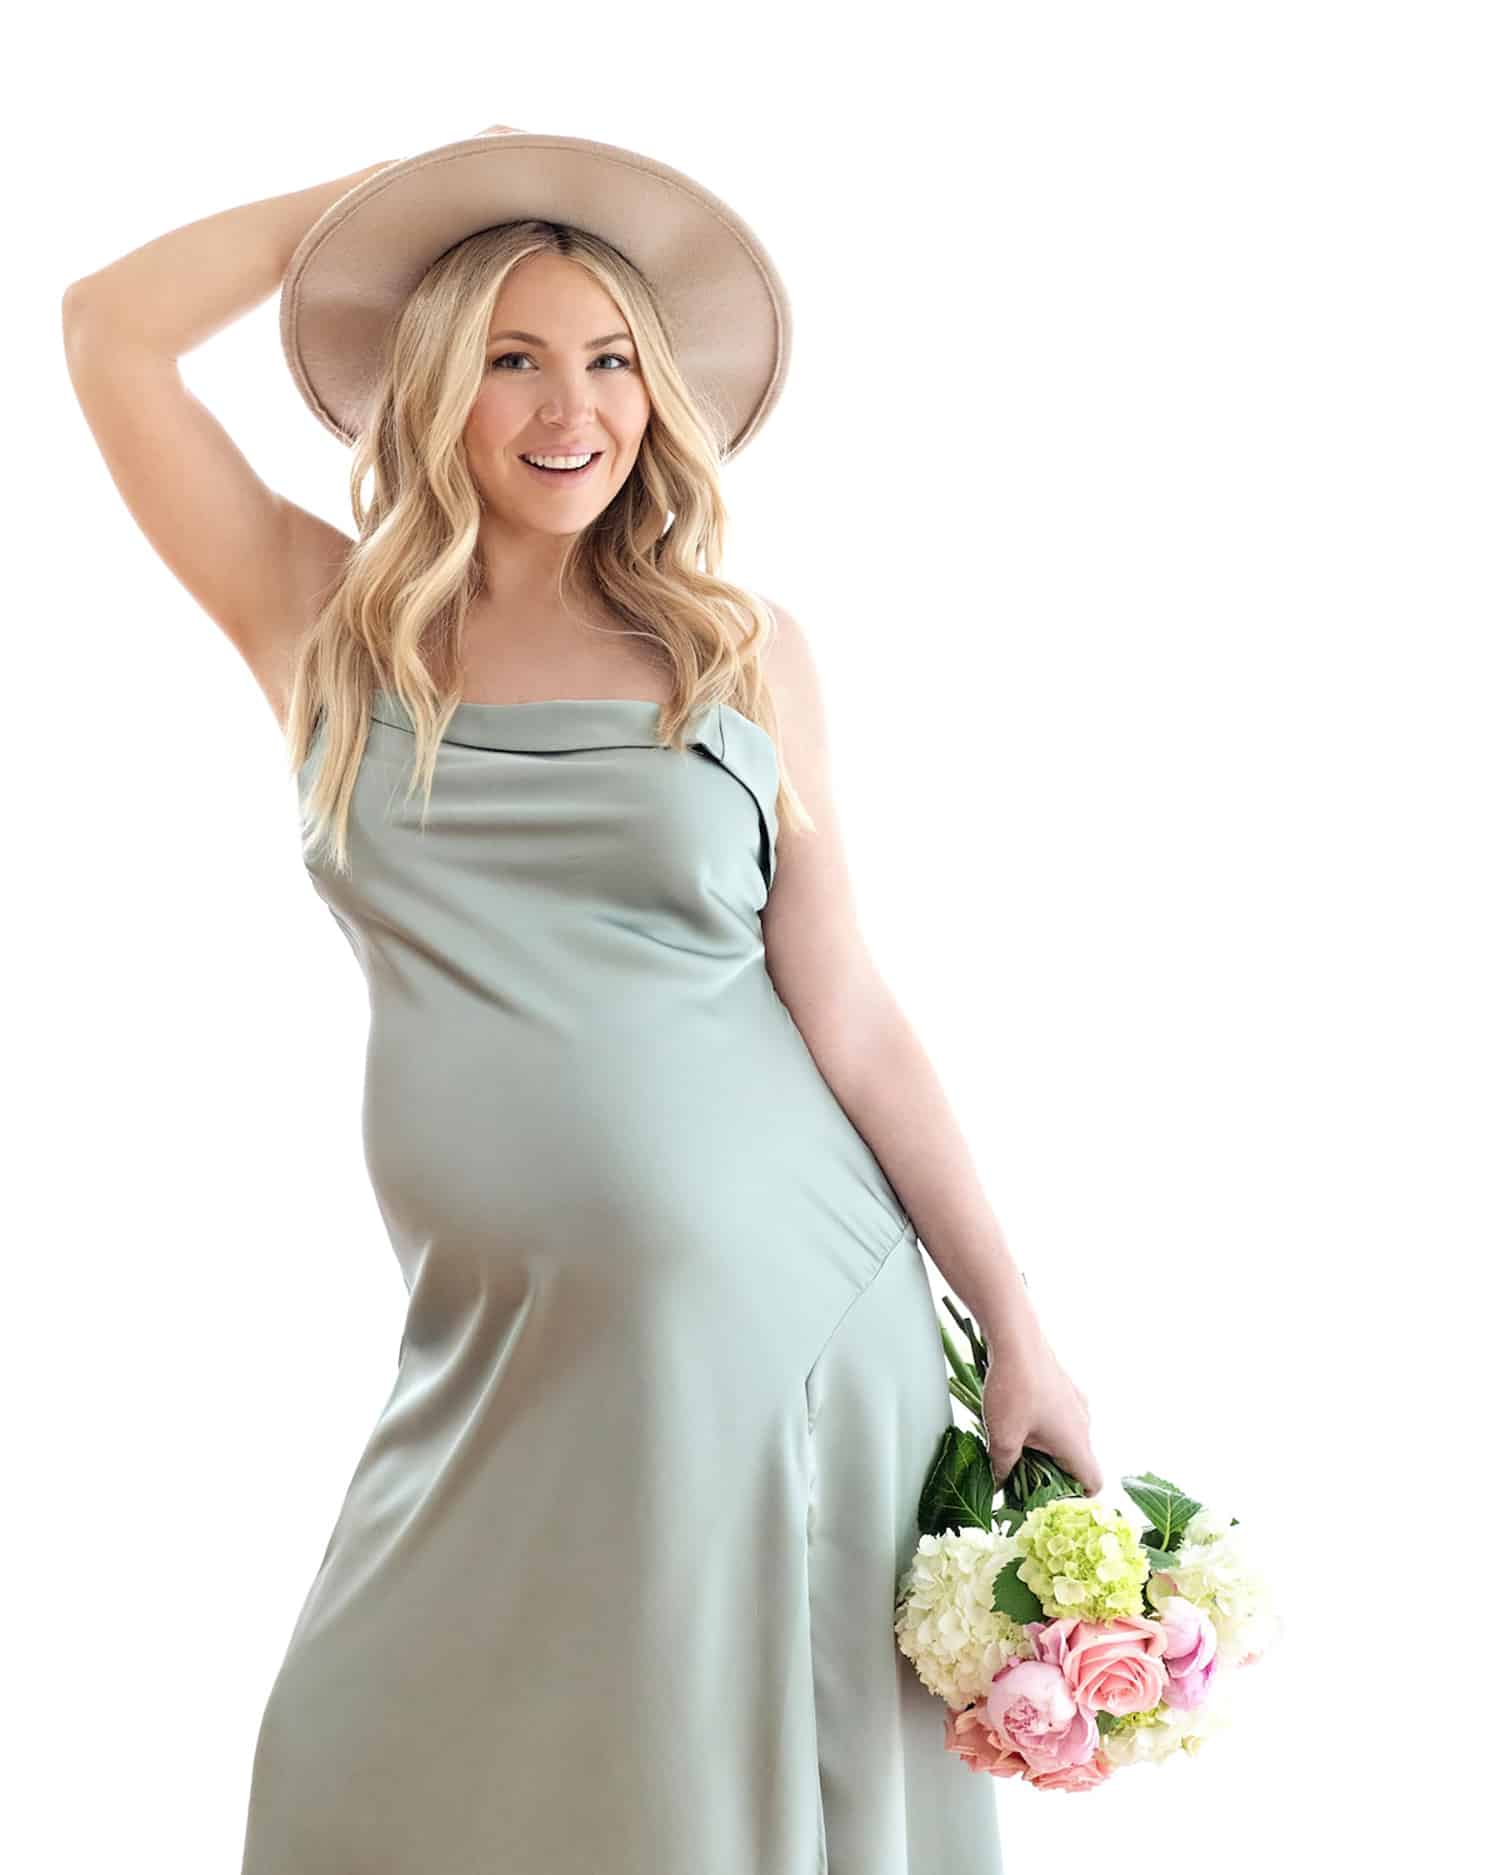 A woman with a hair accessory in a maternity shoot.